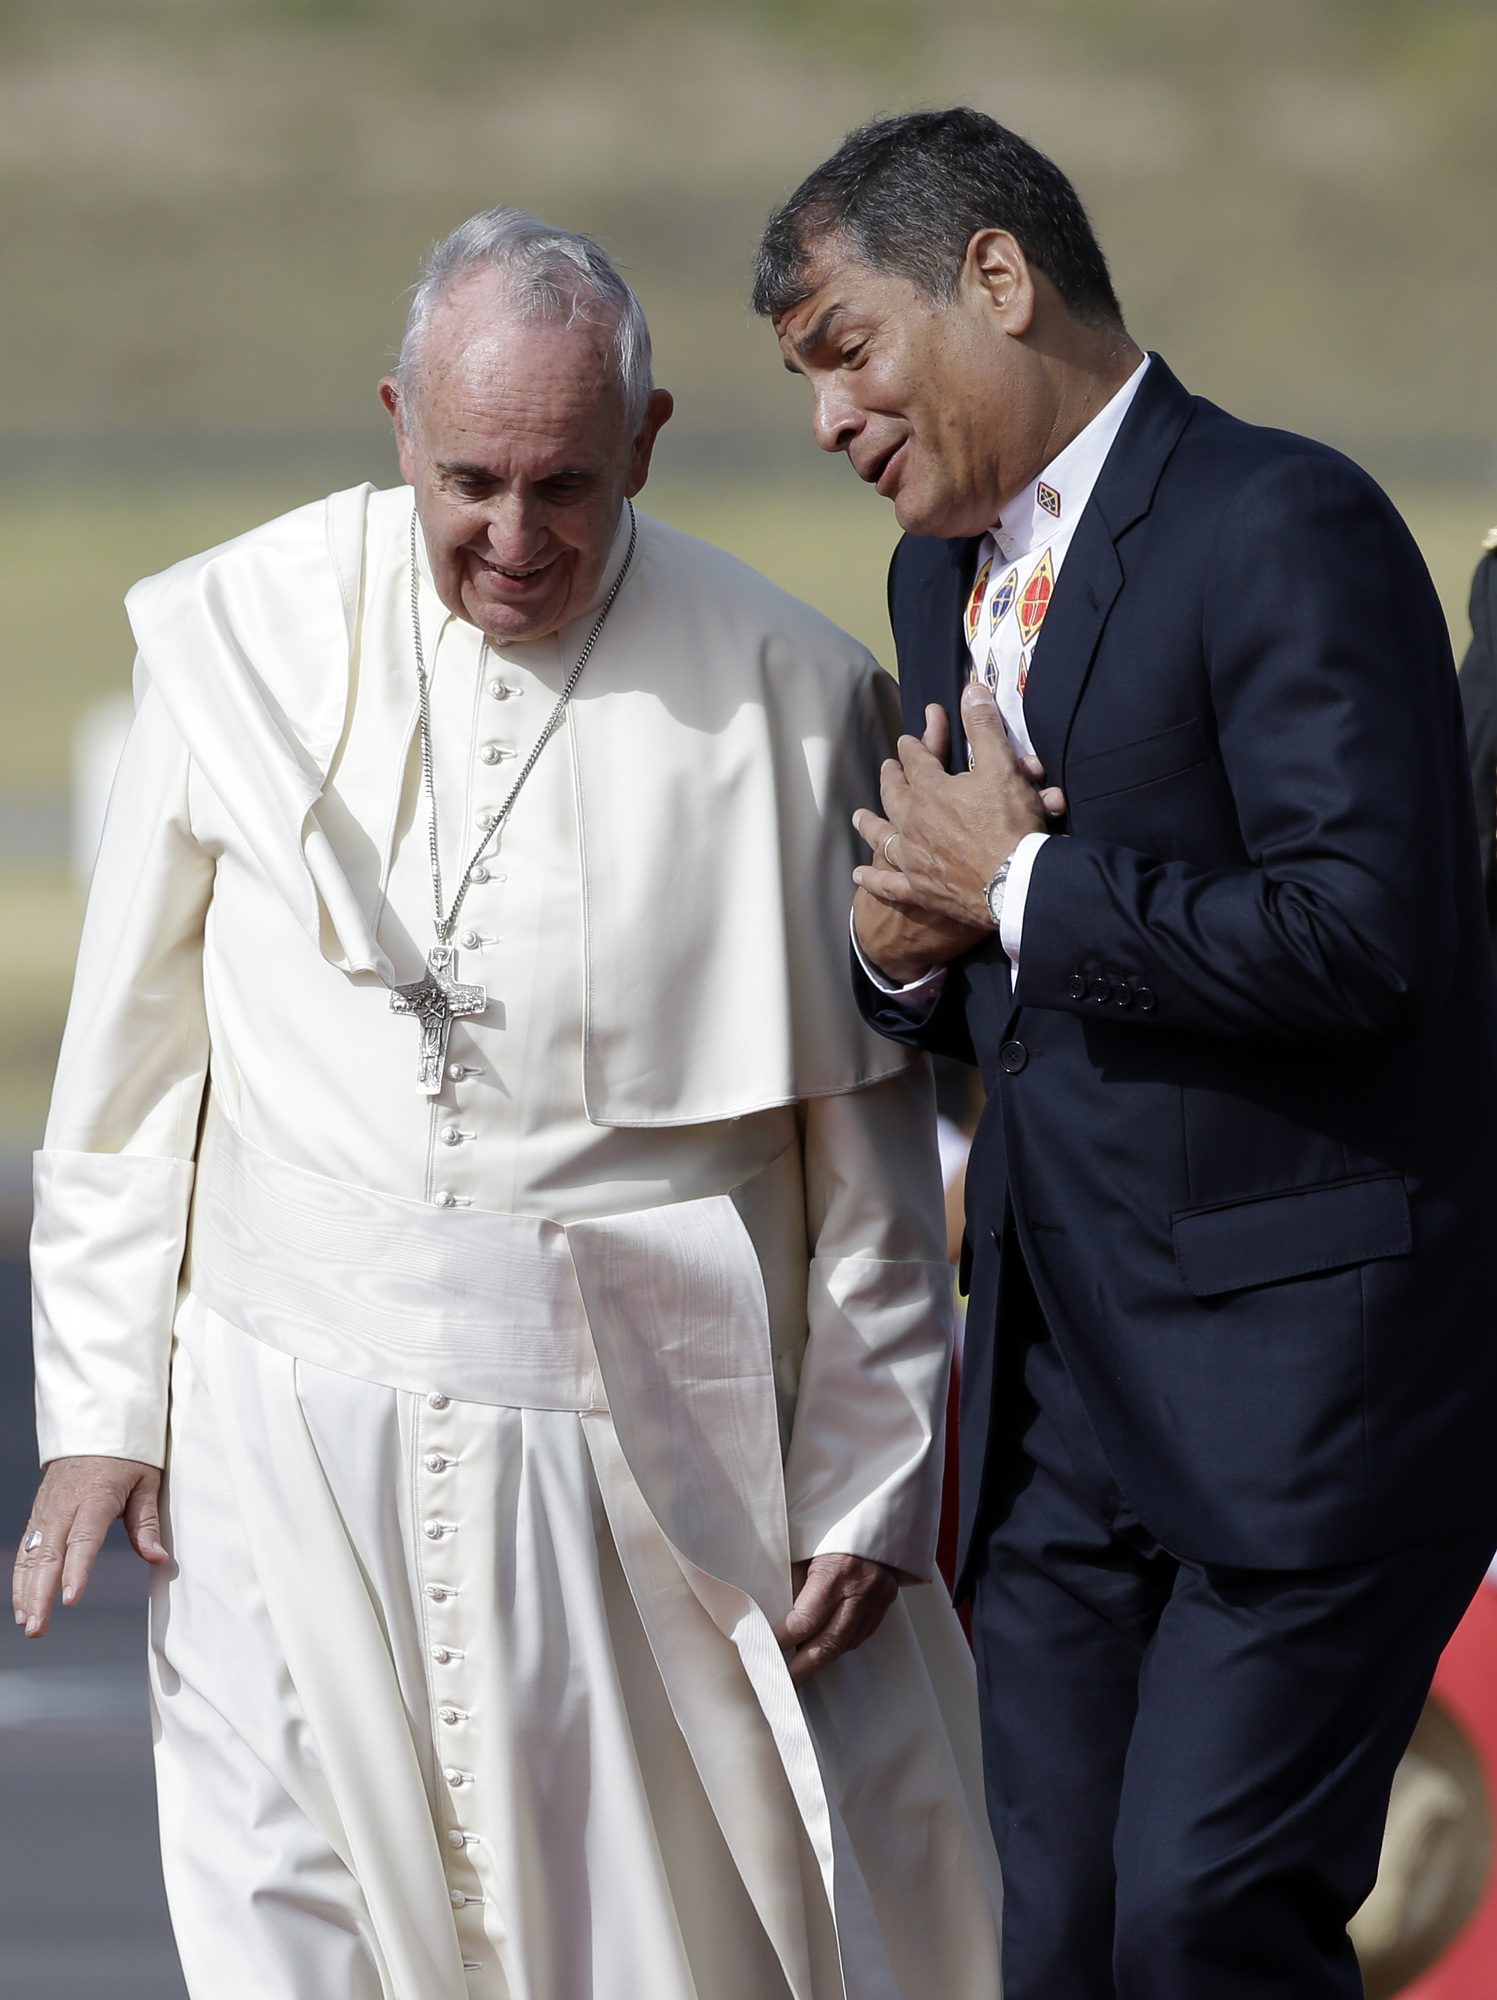 Ecuador's President Rafael Correa, right, welcomes Pope Francis upon his arrival at Quito Airport, Ecuador, Sunday, July 5, 2015. The Pontiff is visiting Ecuador, Bolivia and Paraguay on the occasion of his Apostolic trip from July 5 to July 12. (Gregorio Borgia–AP)